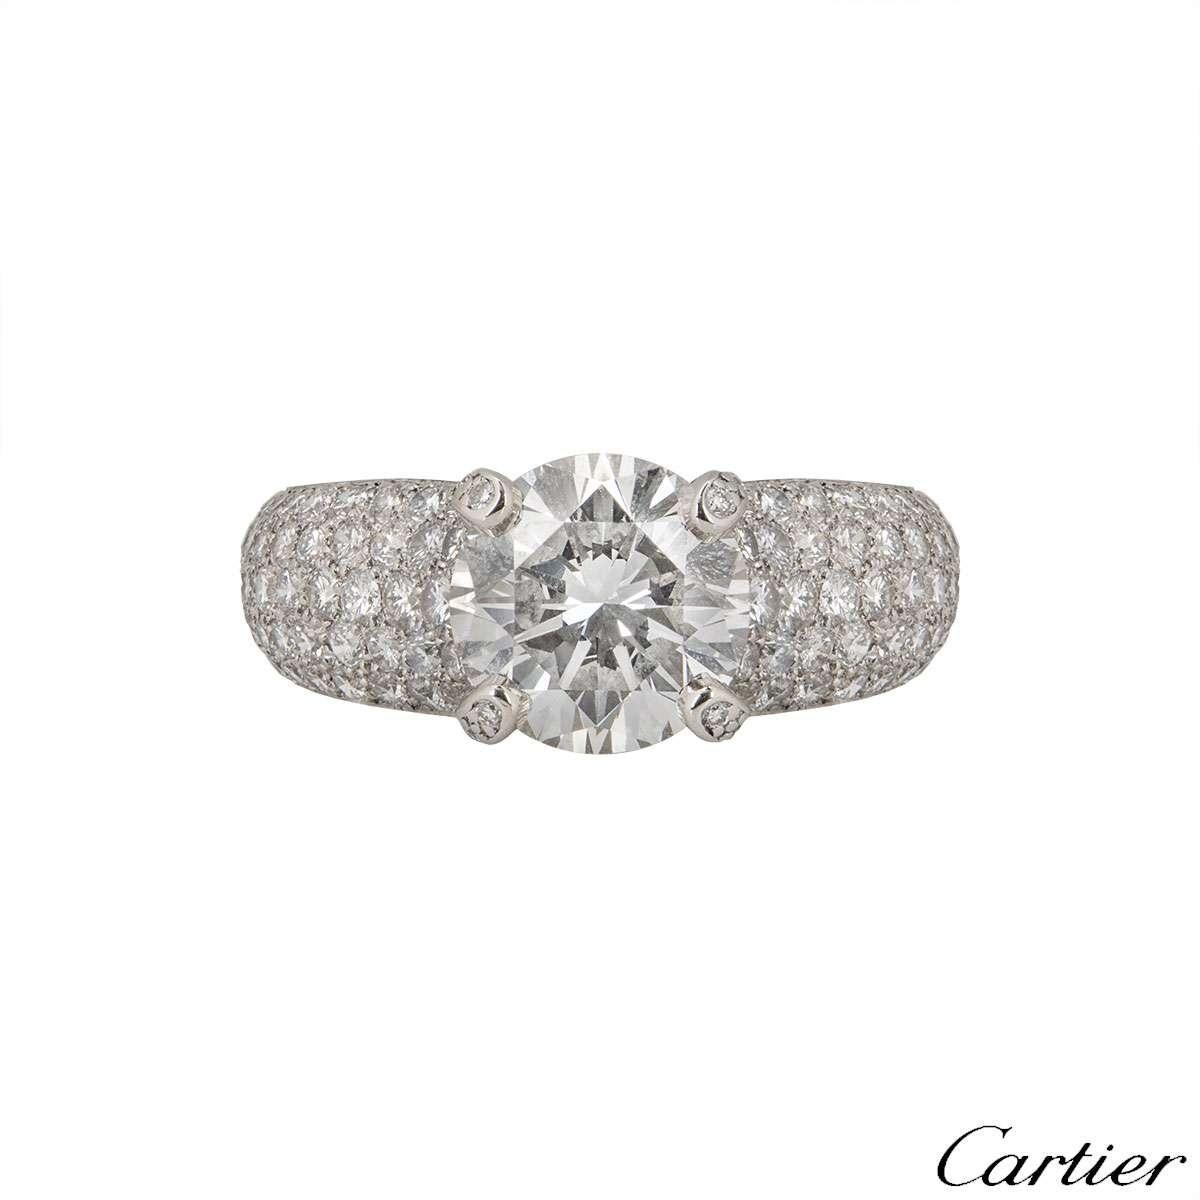 A stunning platinum diamond ring by Cartier from the Luna collection. The ring comprises of a round brilliant cut diamond in a claw setting with a total weight of 2.24ct, F colour and VVS1 clarity with pave round brilliant cut diamonds partially set